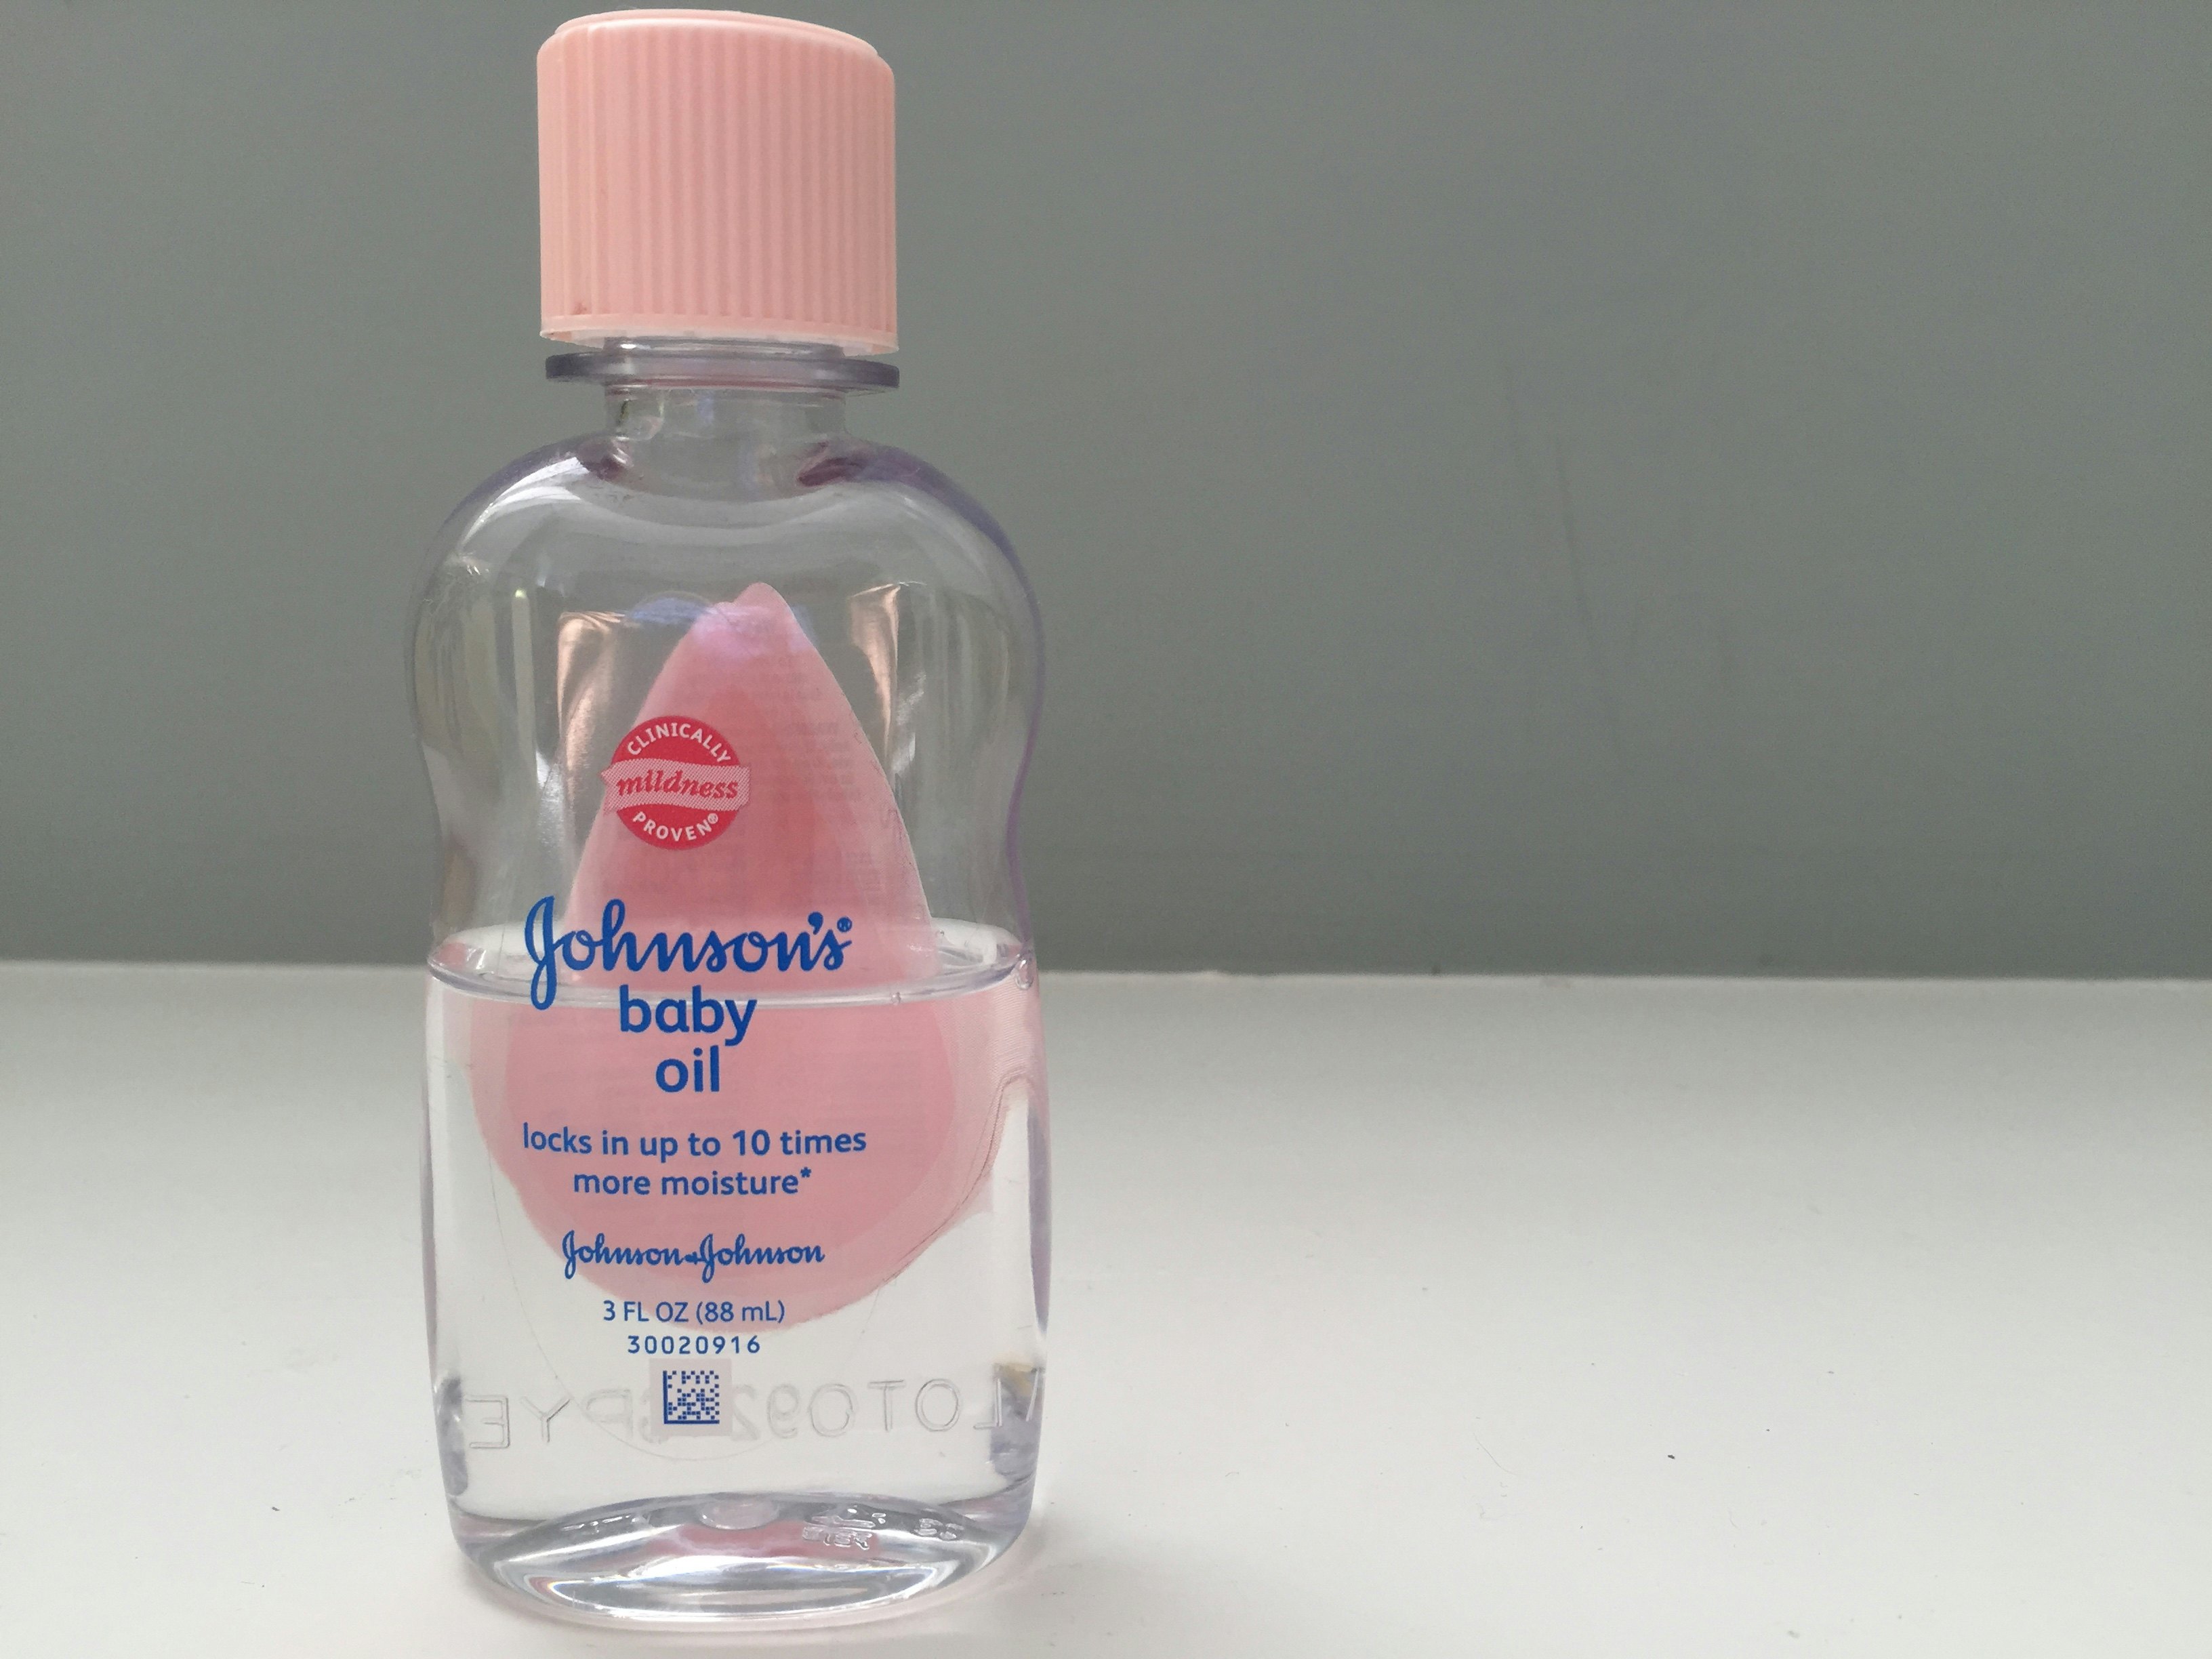 baby soap is good for adults